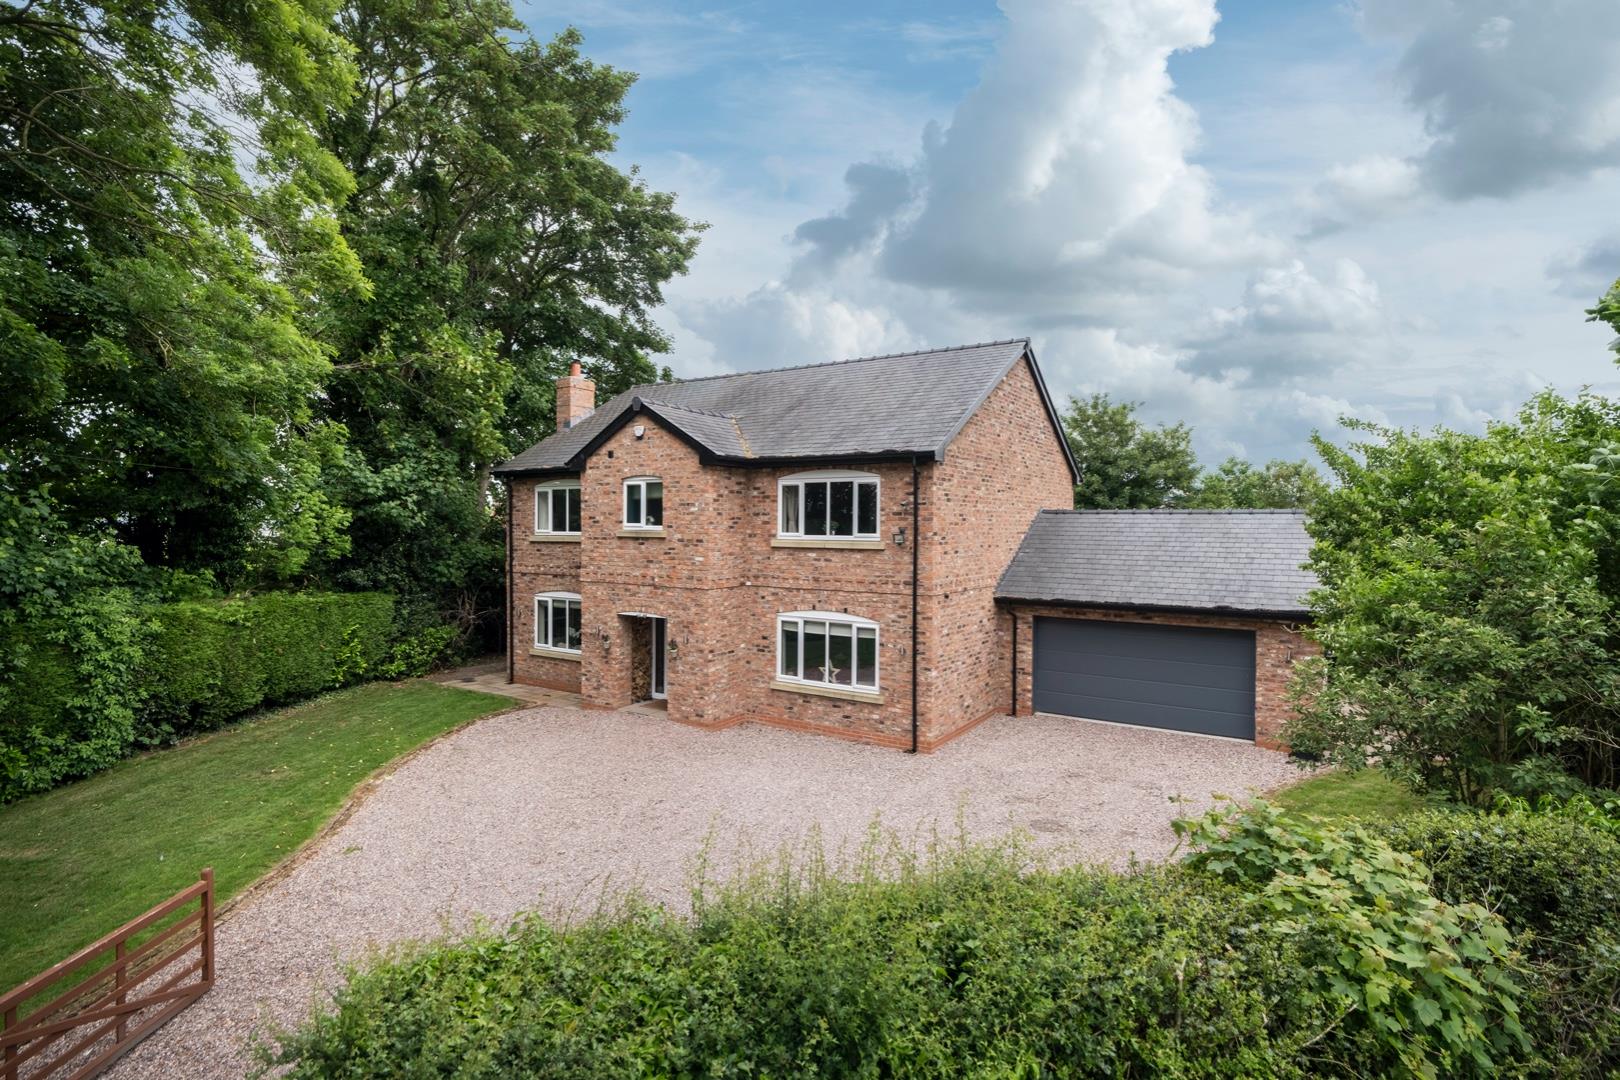 4 bedroom  Detached House for Sale in Clotton